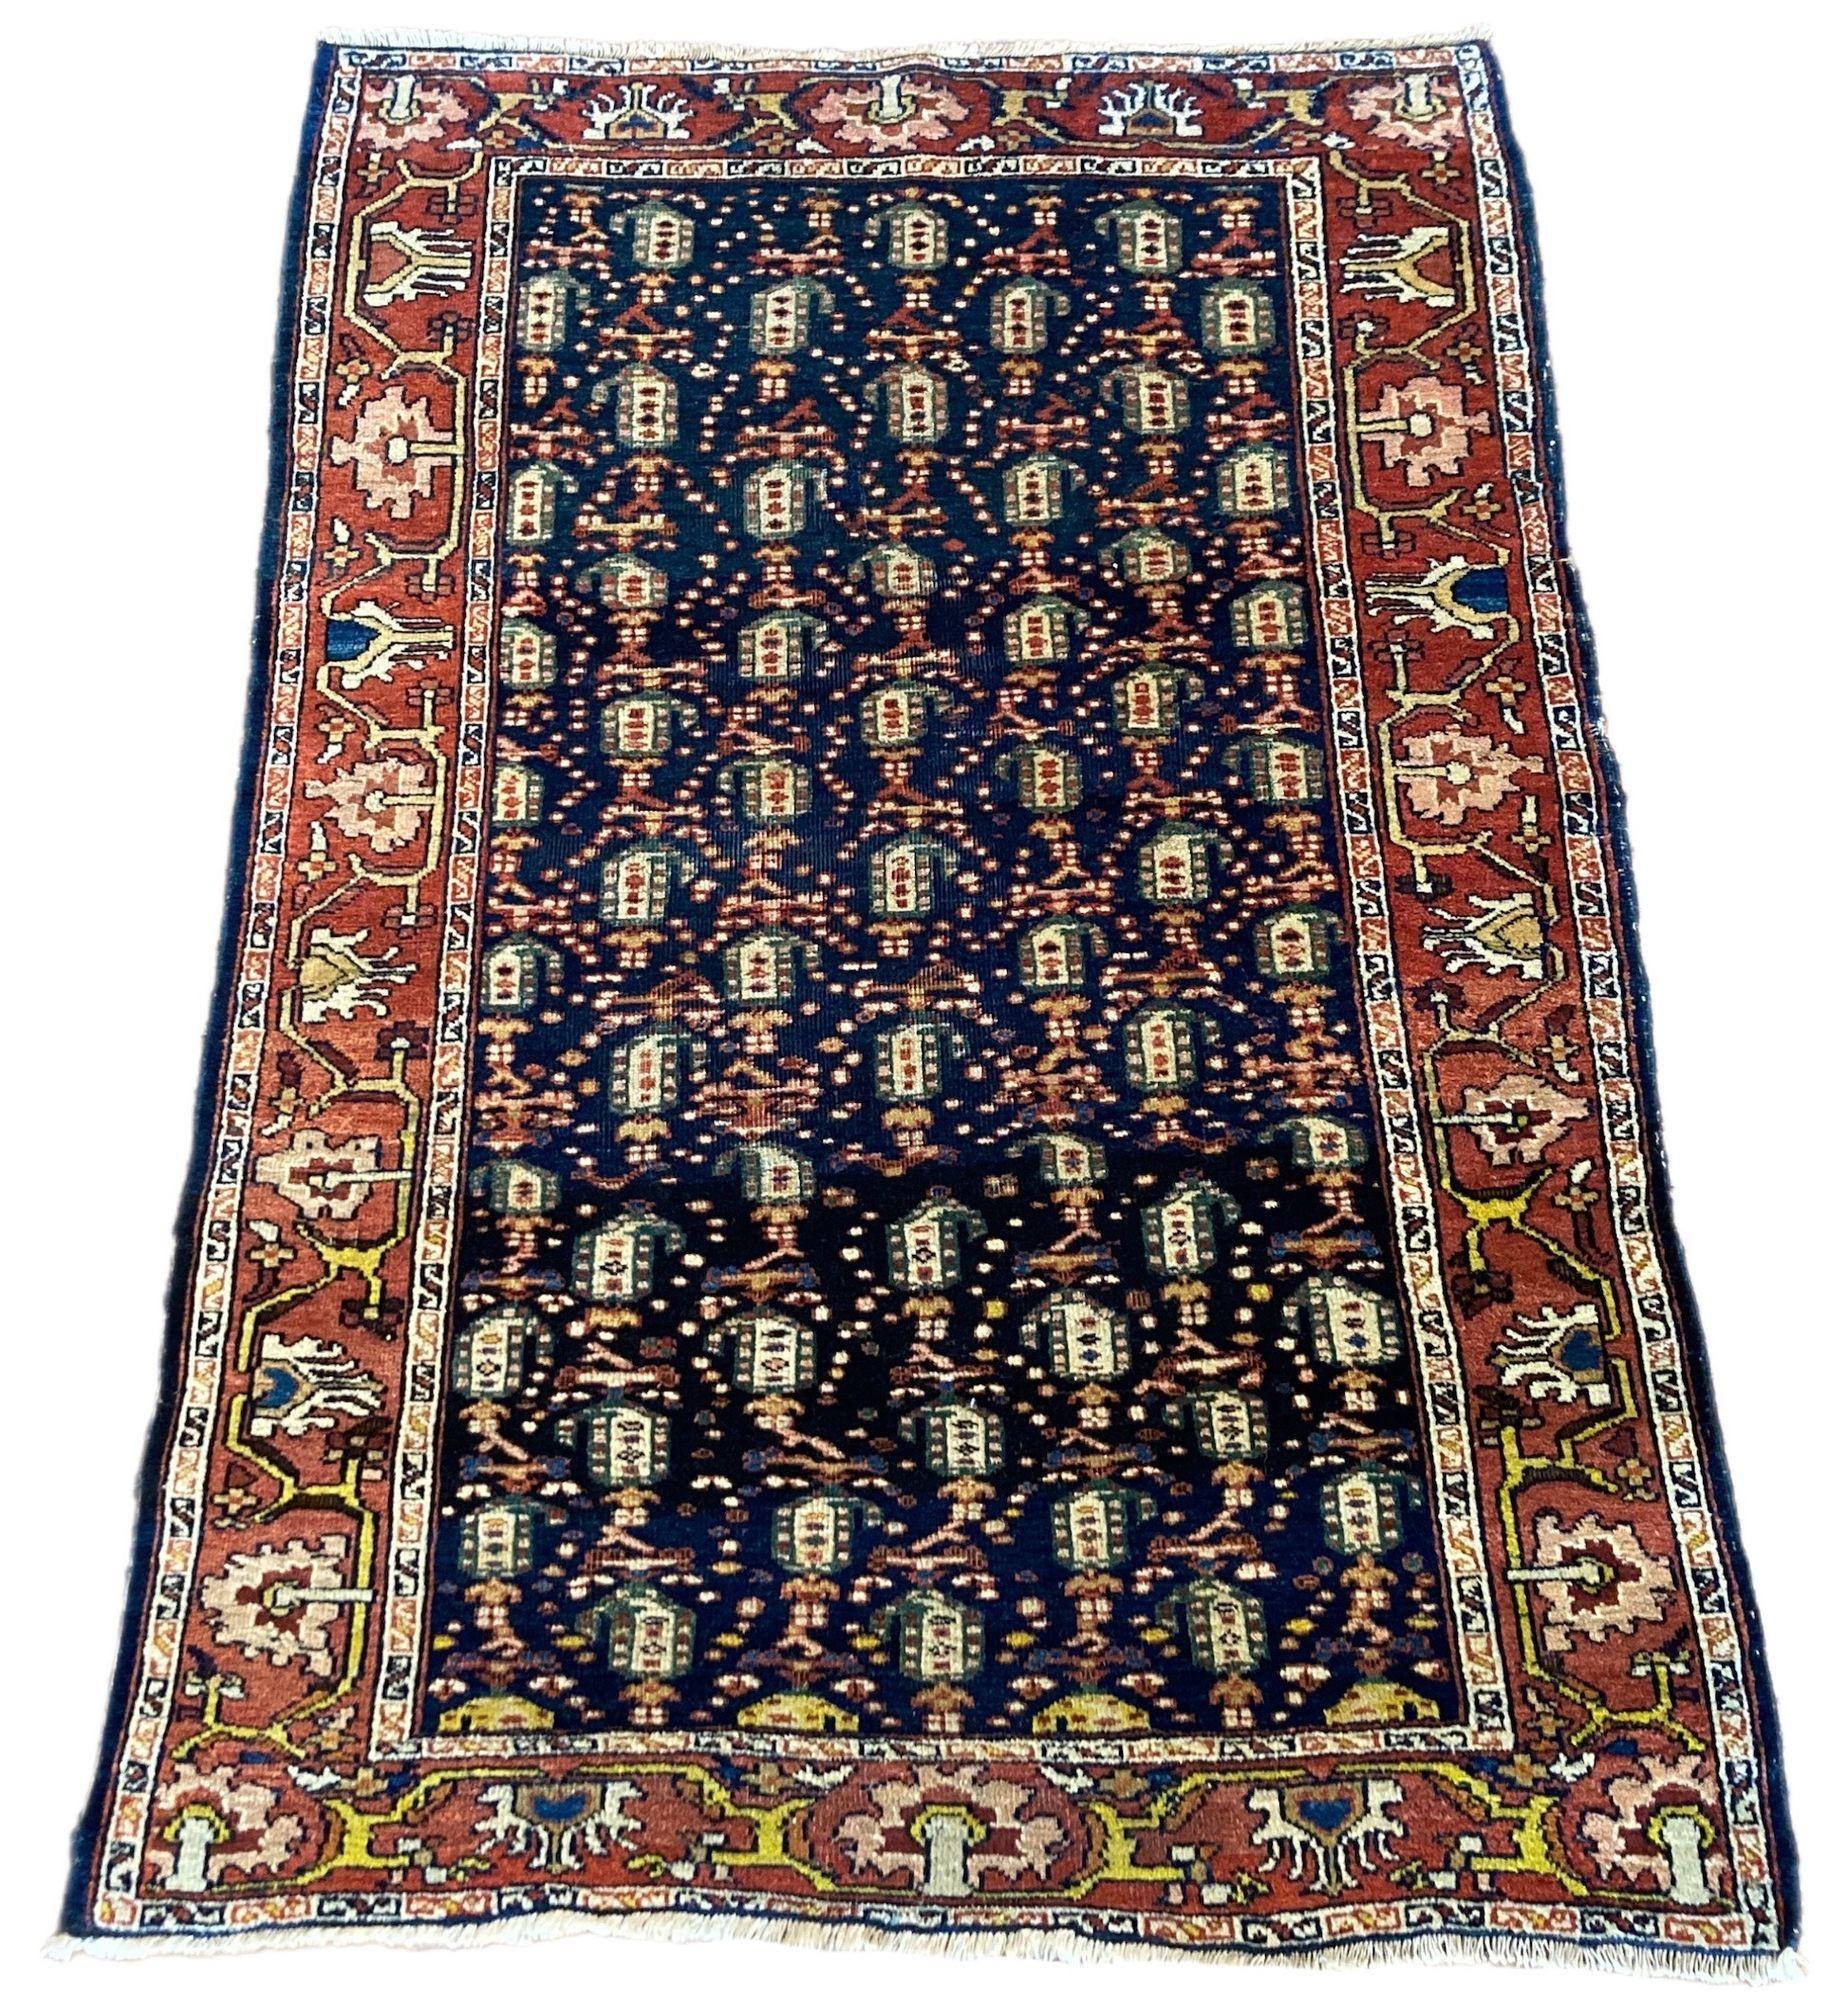 A beautiful little antique Mahal rug, handwoven circa 1910 with an all over Boteh design on a deep indigo field and terracotta border. Lovely secondary colours of green and gold throughout and a charming little rug.
Size: 1.51m x 1.02m (5ft x 3ft